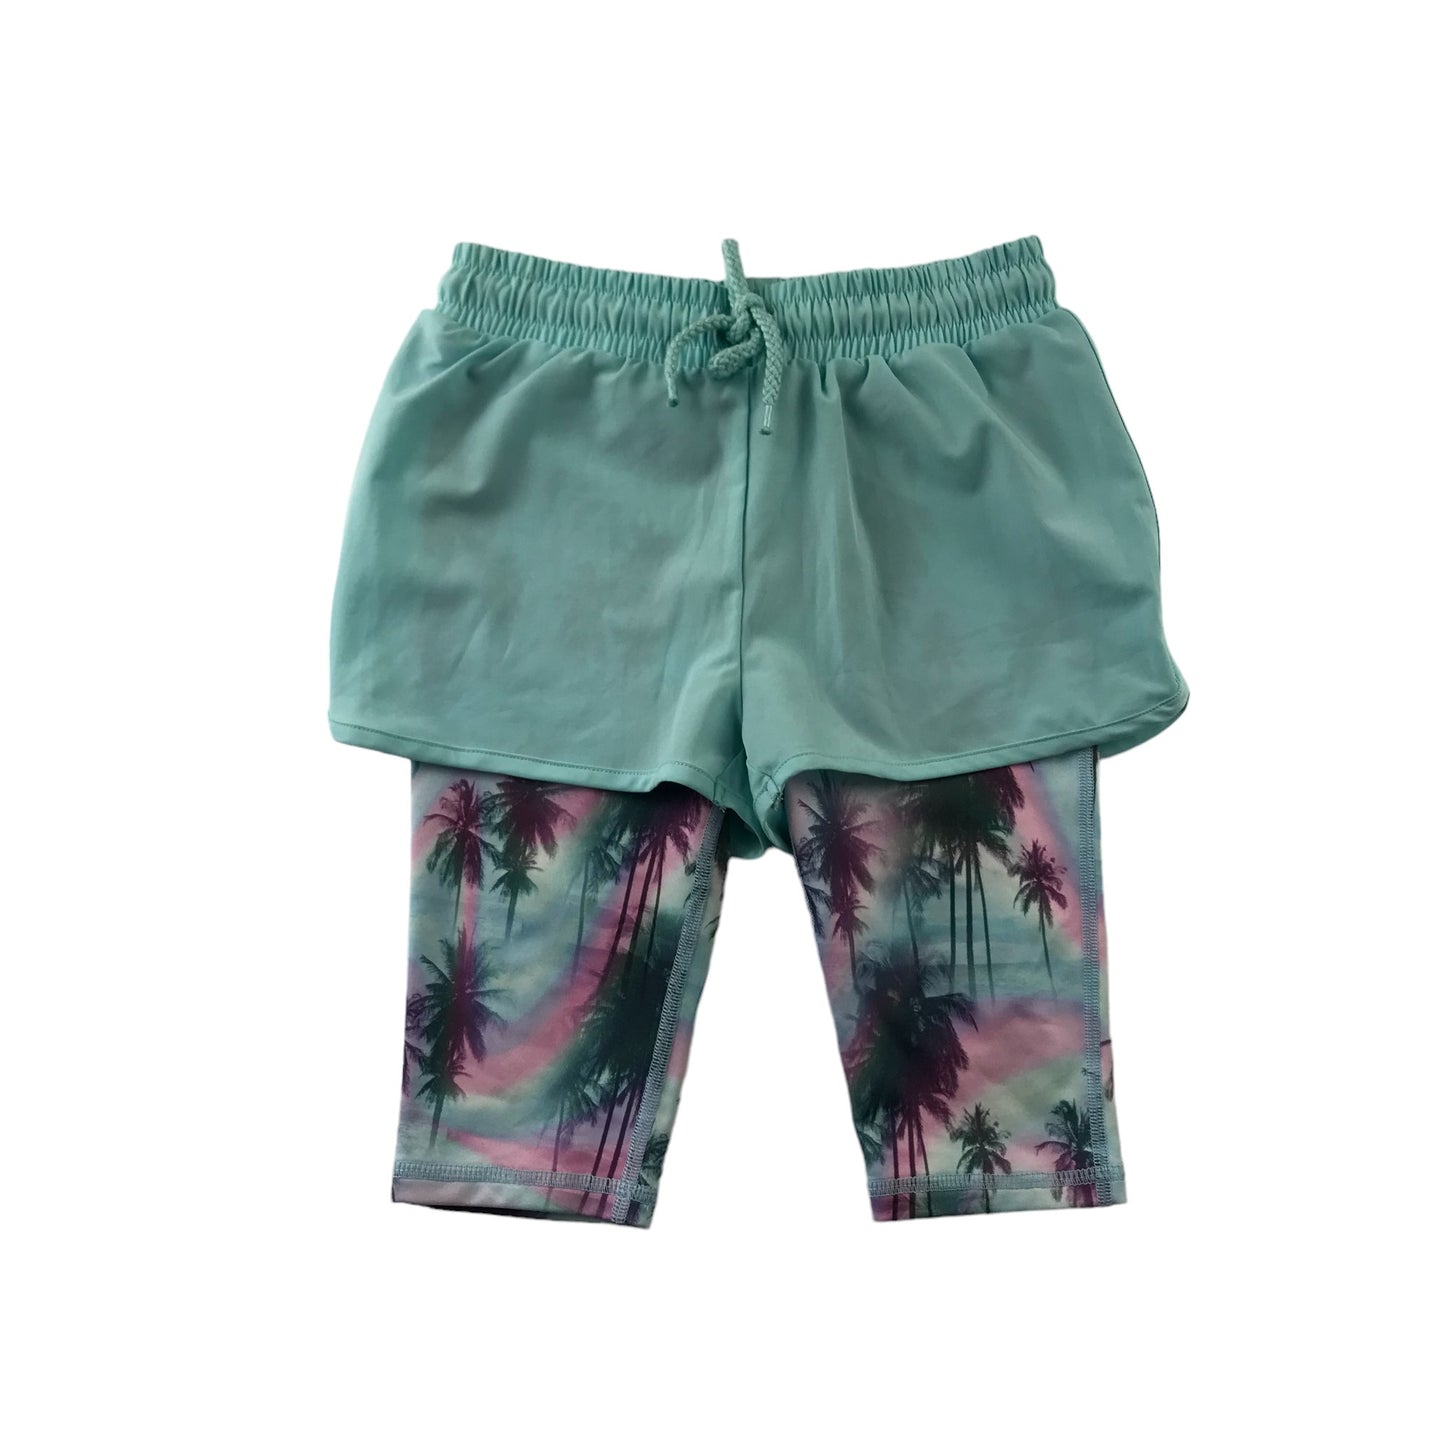 Next Sport Shorts Age 4 Blue with Graphic Print Compression Under Shorts